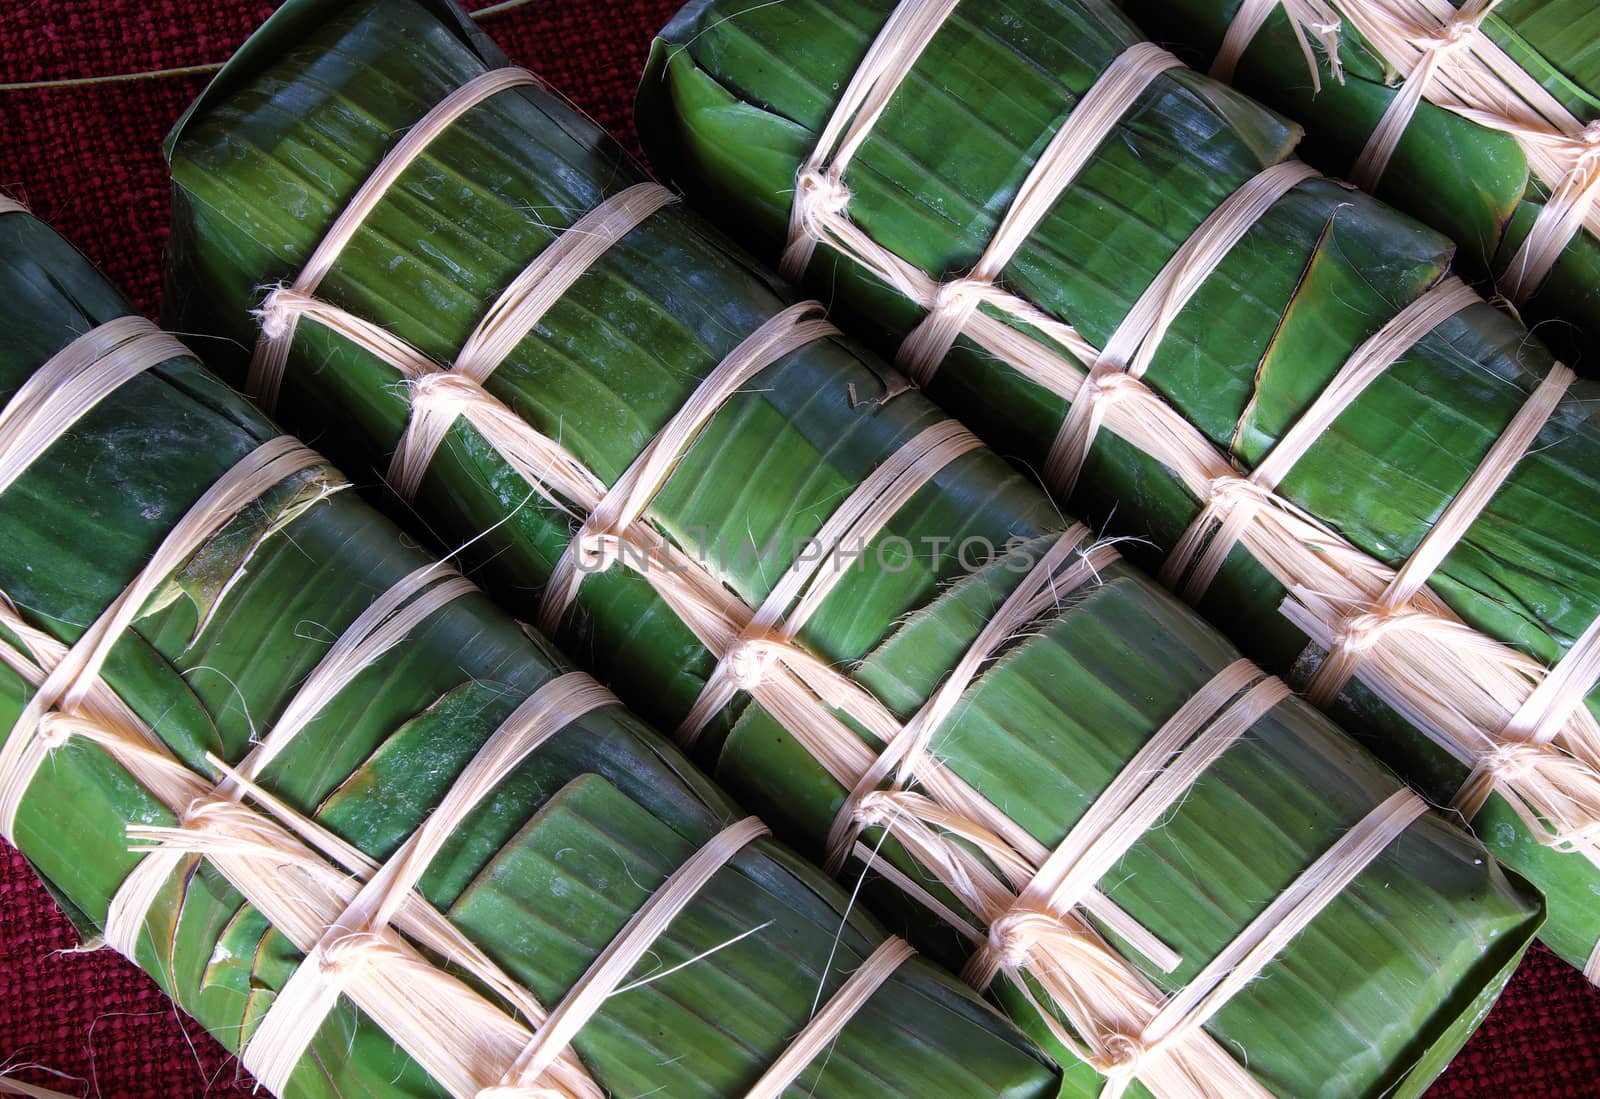 Vietnamese food, traditional food on tet holiday in spring, banh tet also name Cylindric glutinous rice cake, make from sticky rice, mung been, cover by banana leaf, tradition eating on lunar new year